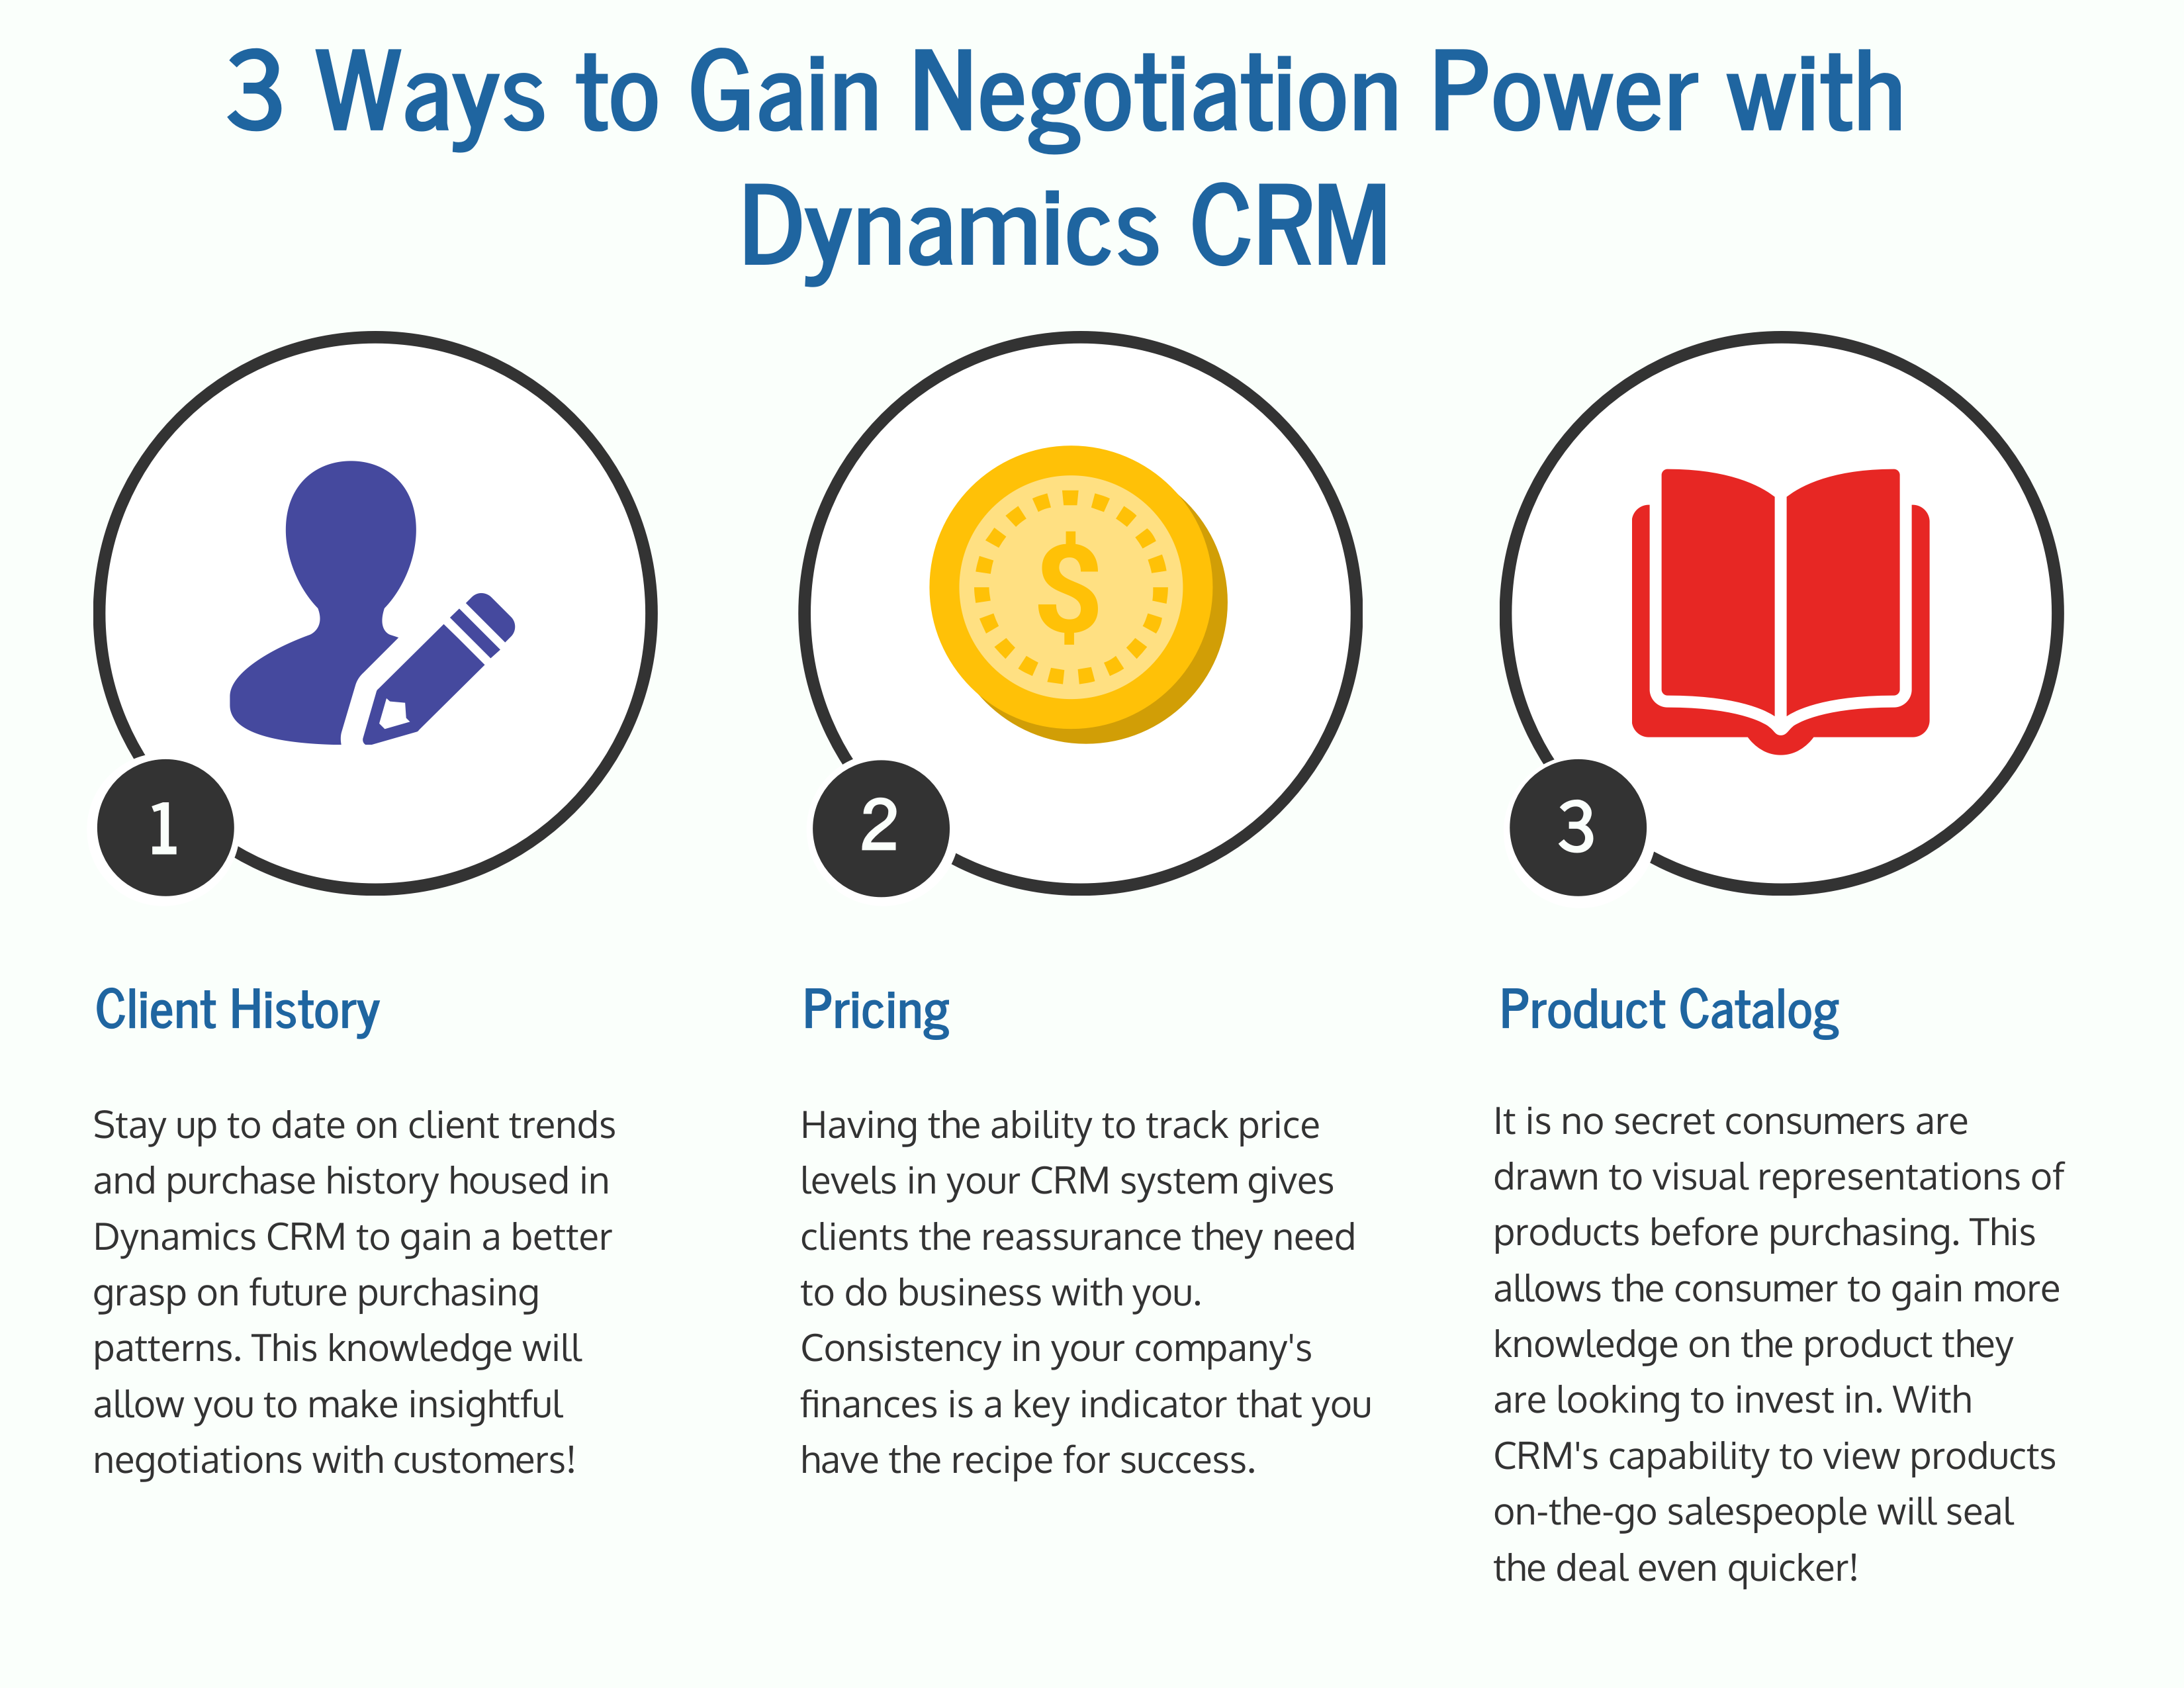 3 ways to gain negotiation power with dynamics crm